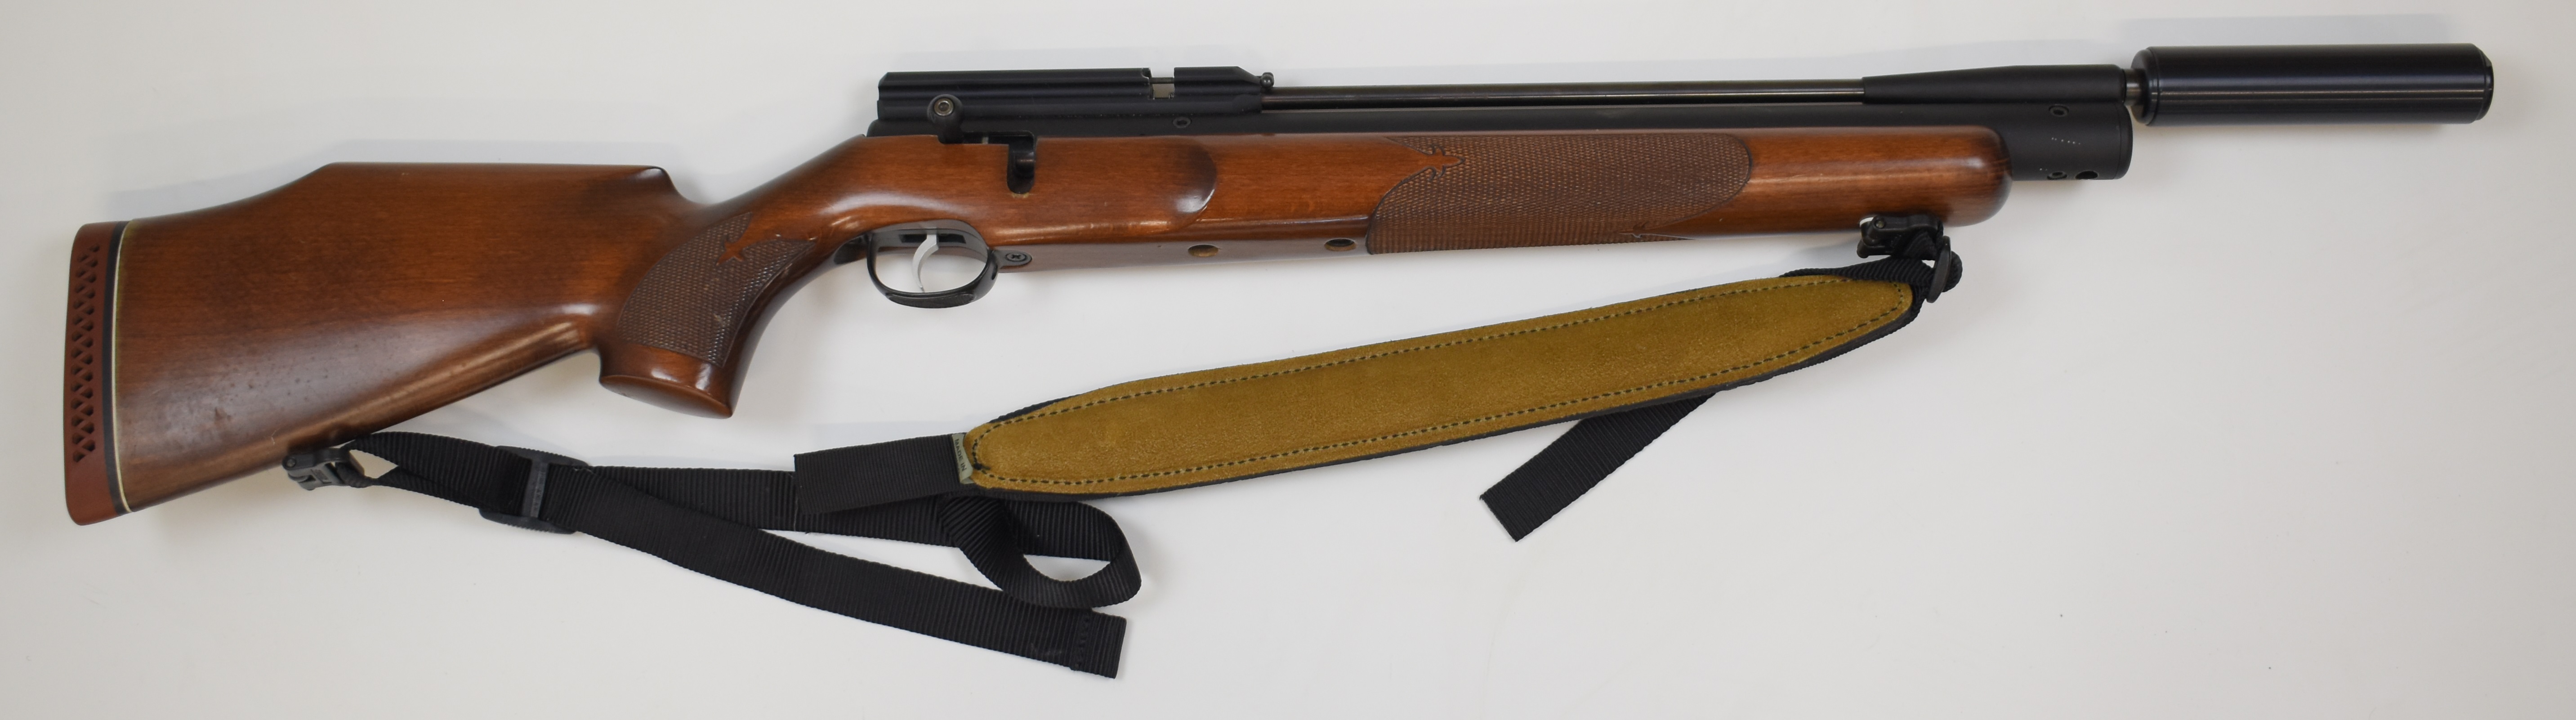 Webley Axsor .22 PCP air rifle with chequered semi-pistol grip and forend, raised cheek piece, - Image 12 of 20